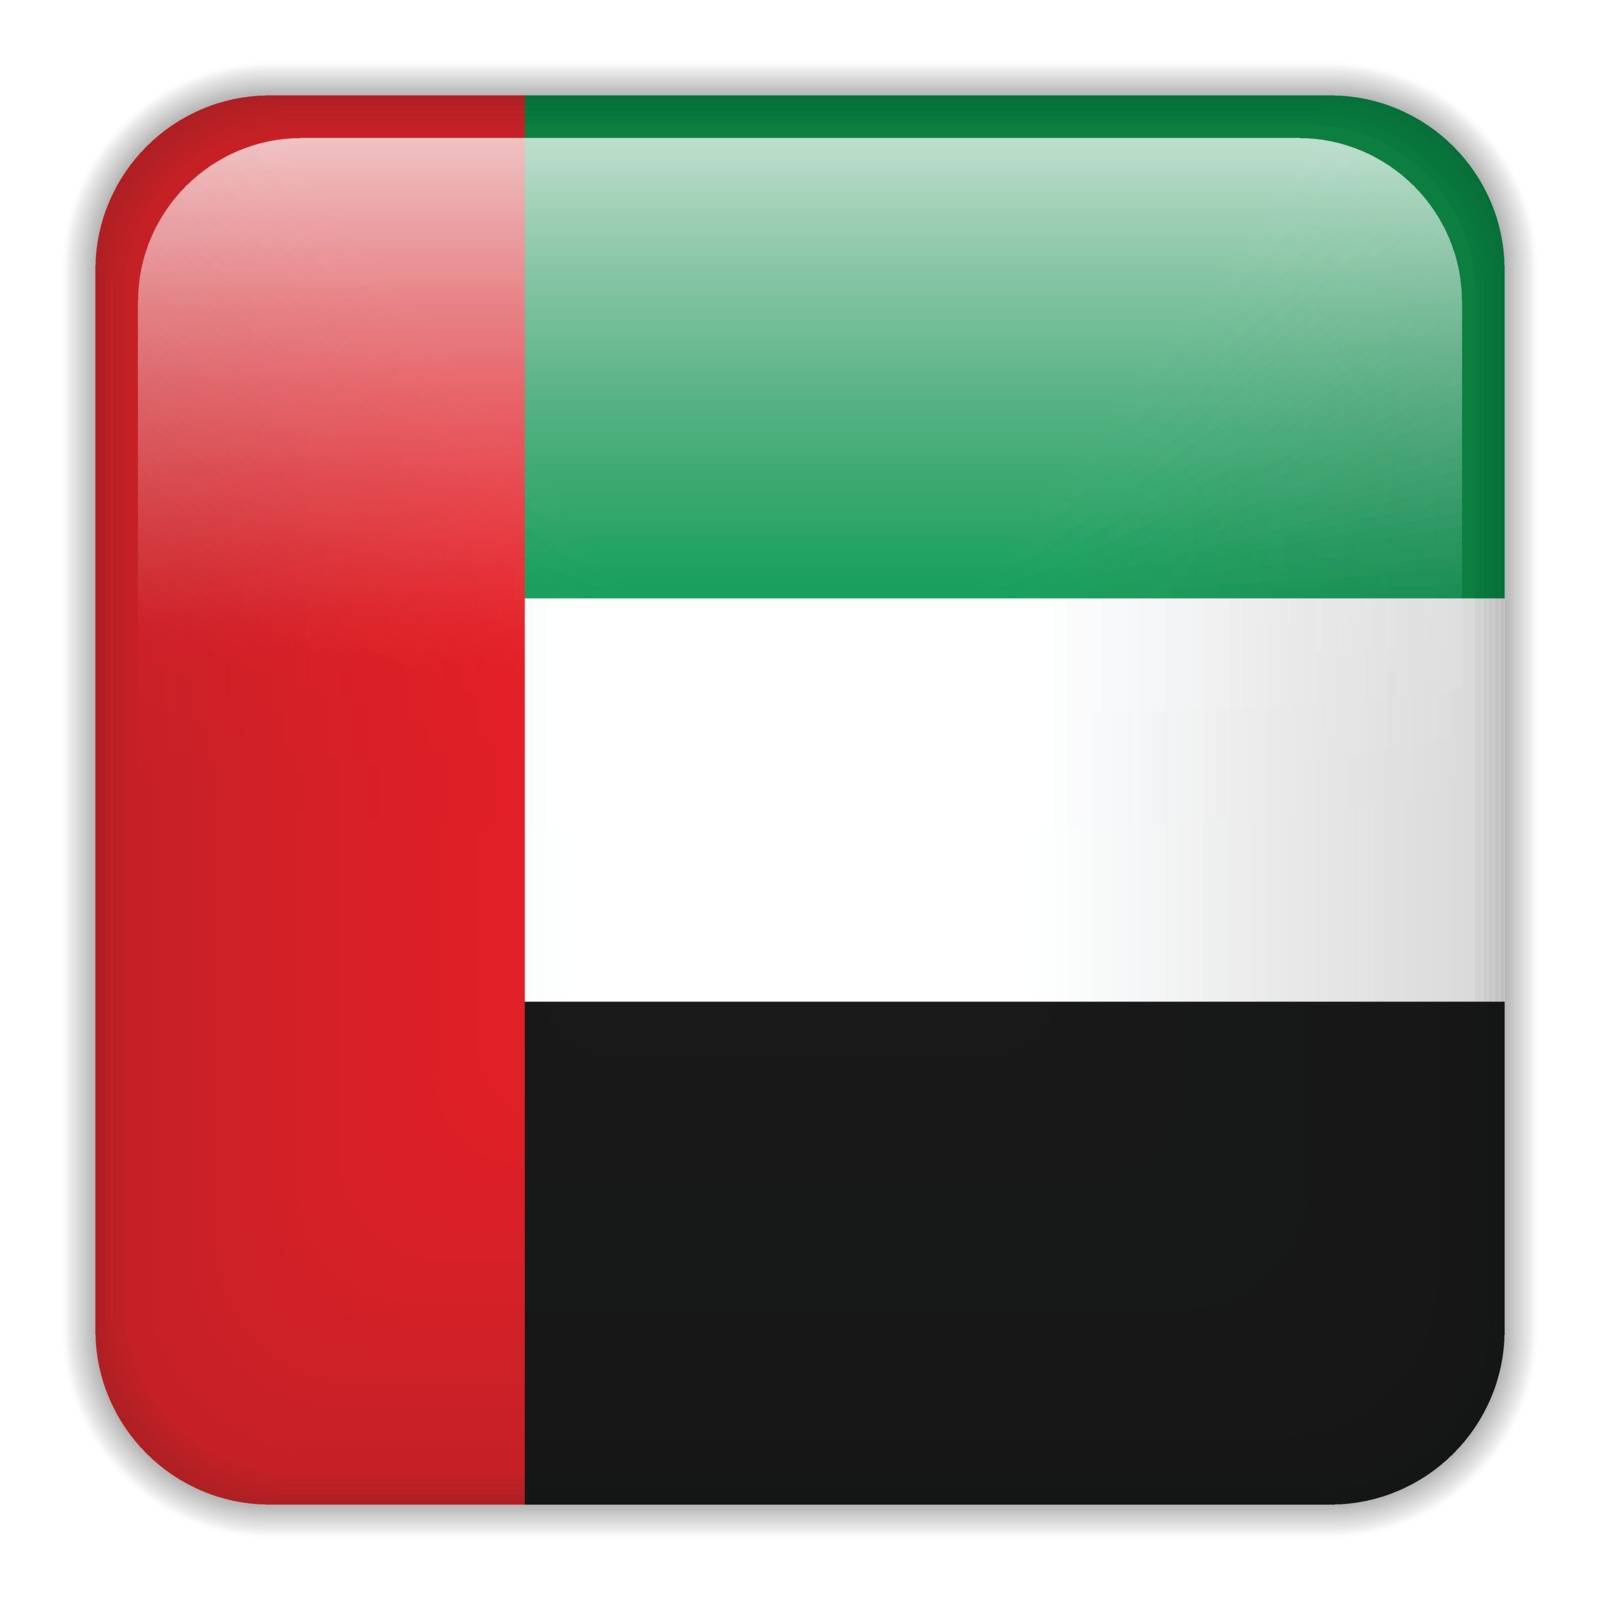 Emirates Flag Smartphone Application Square Buttons by gubh83